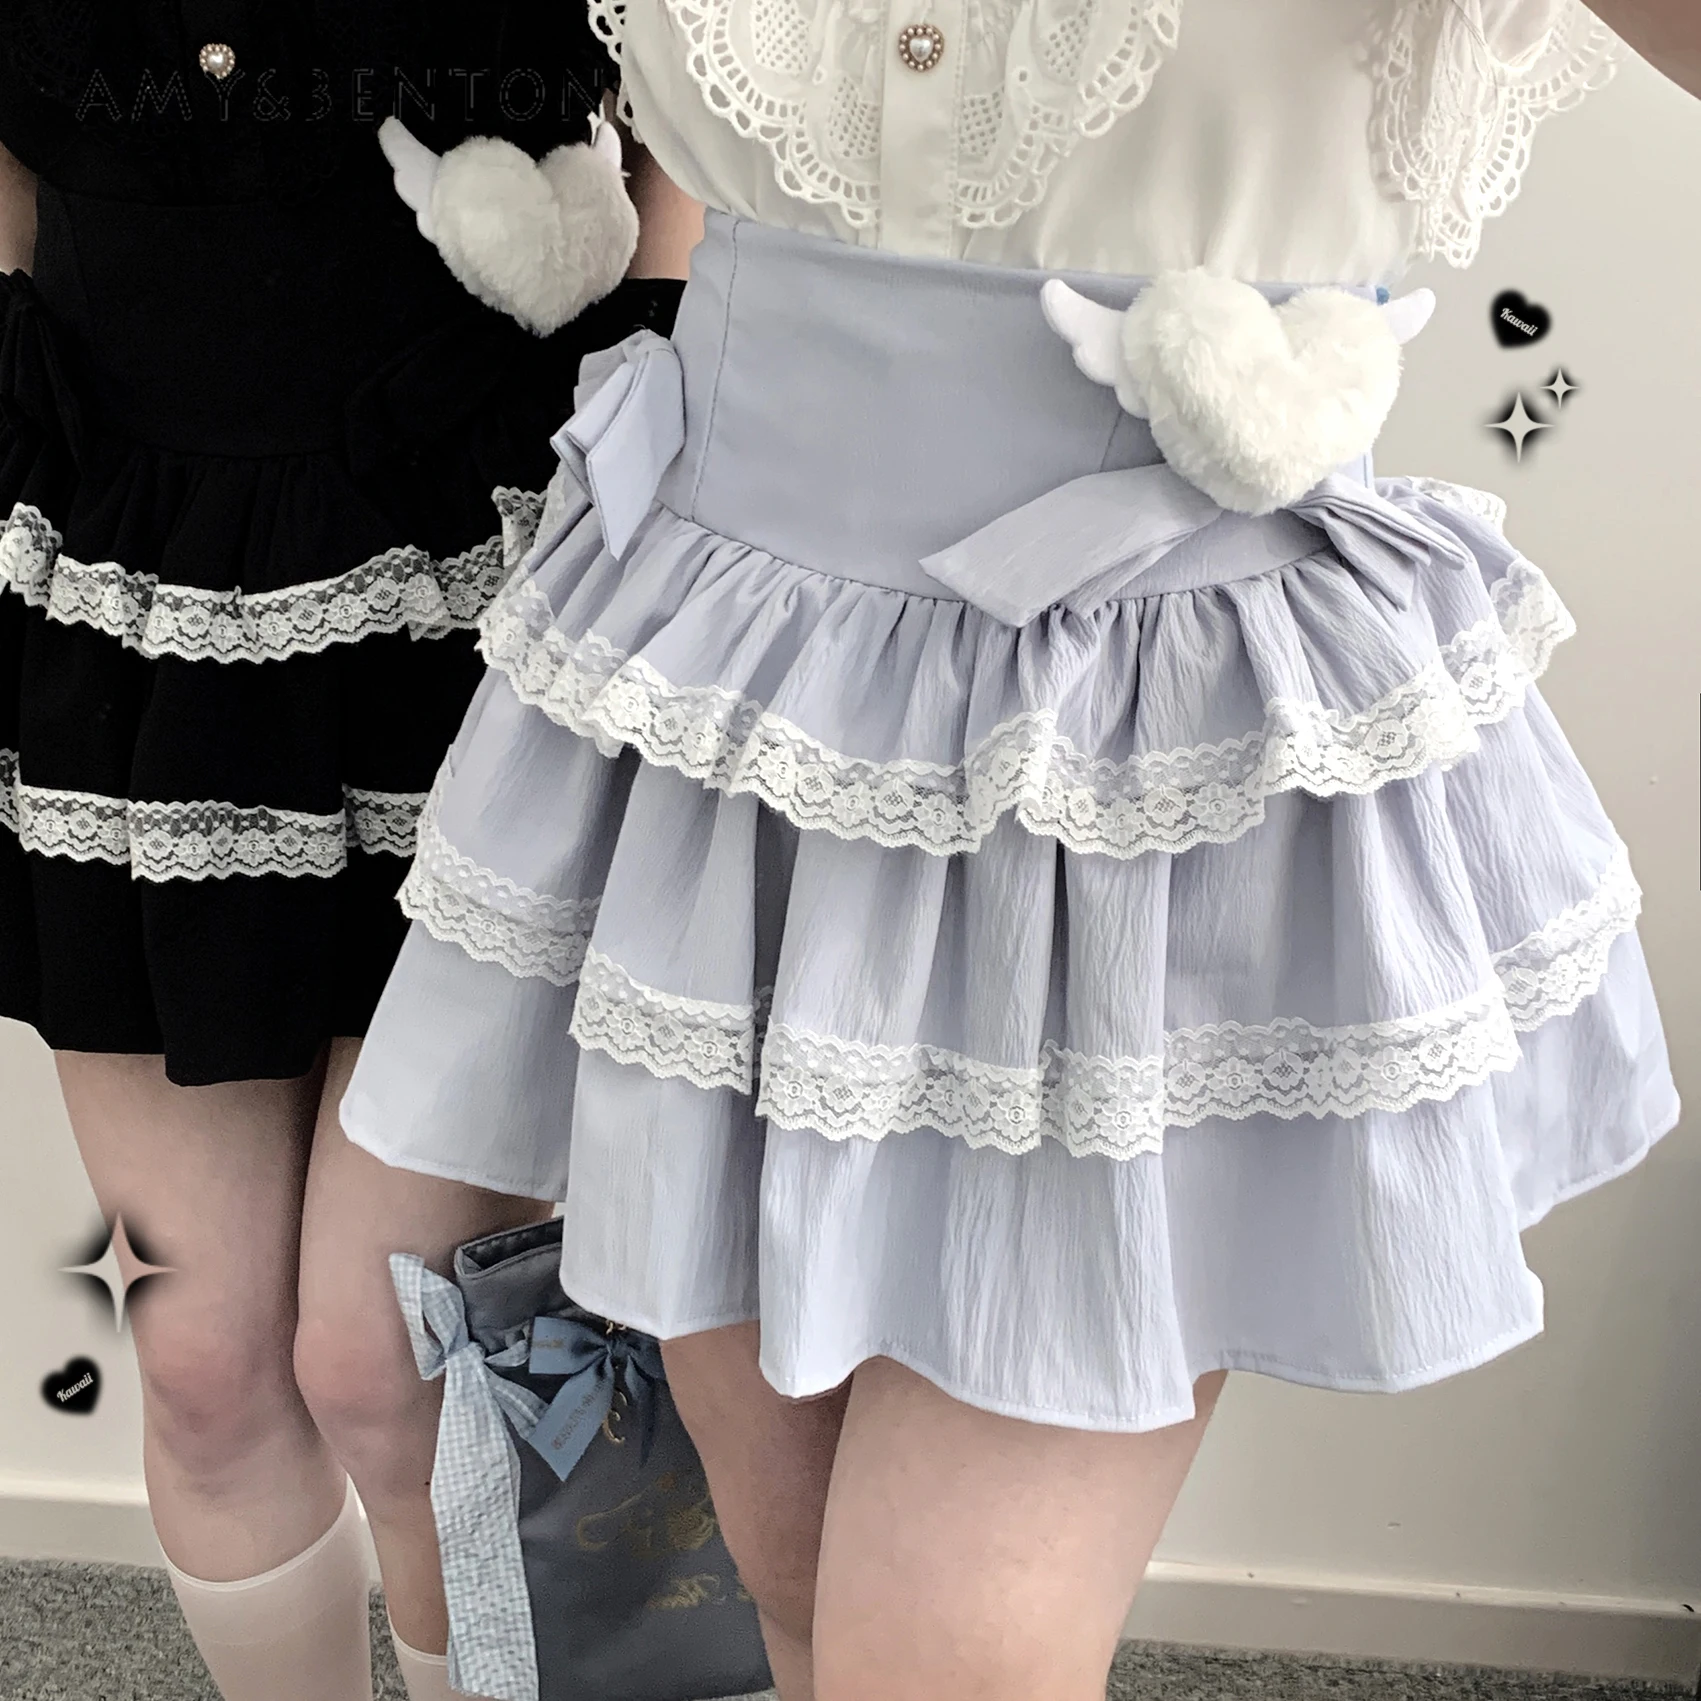 

Preppy Style Sweet Cute Bow Double Lace Mini Skirt Summer Lolita Mine Series Mass Production Multi-layer Skirts Y2K Kawaii Skirt